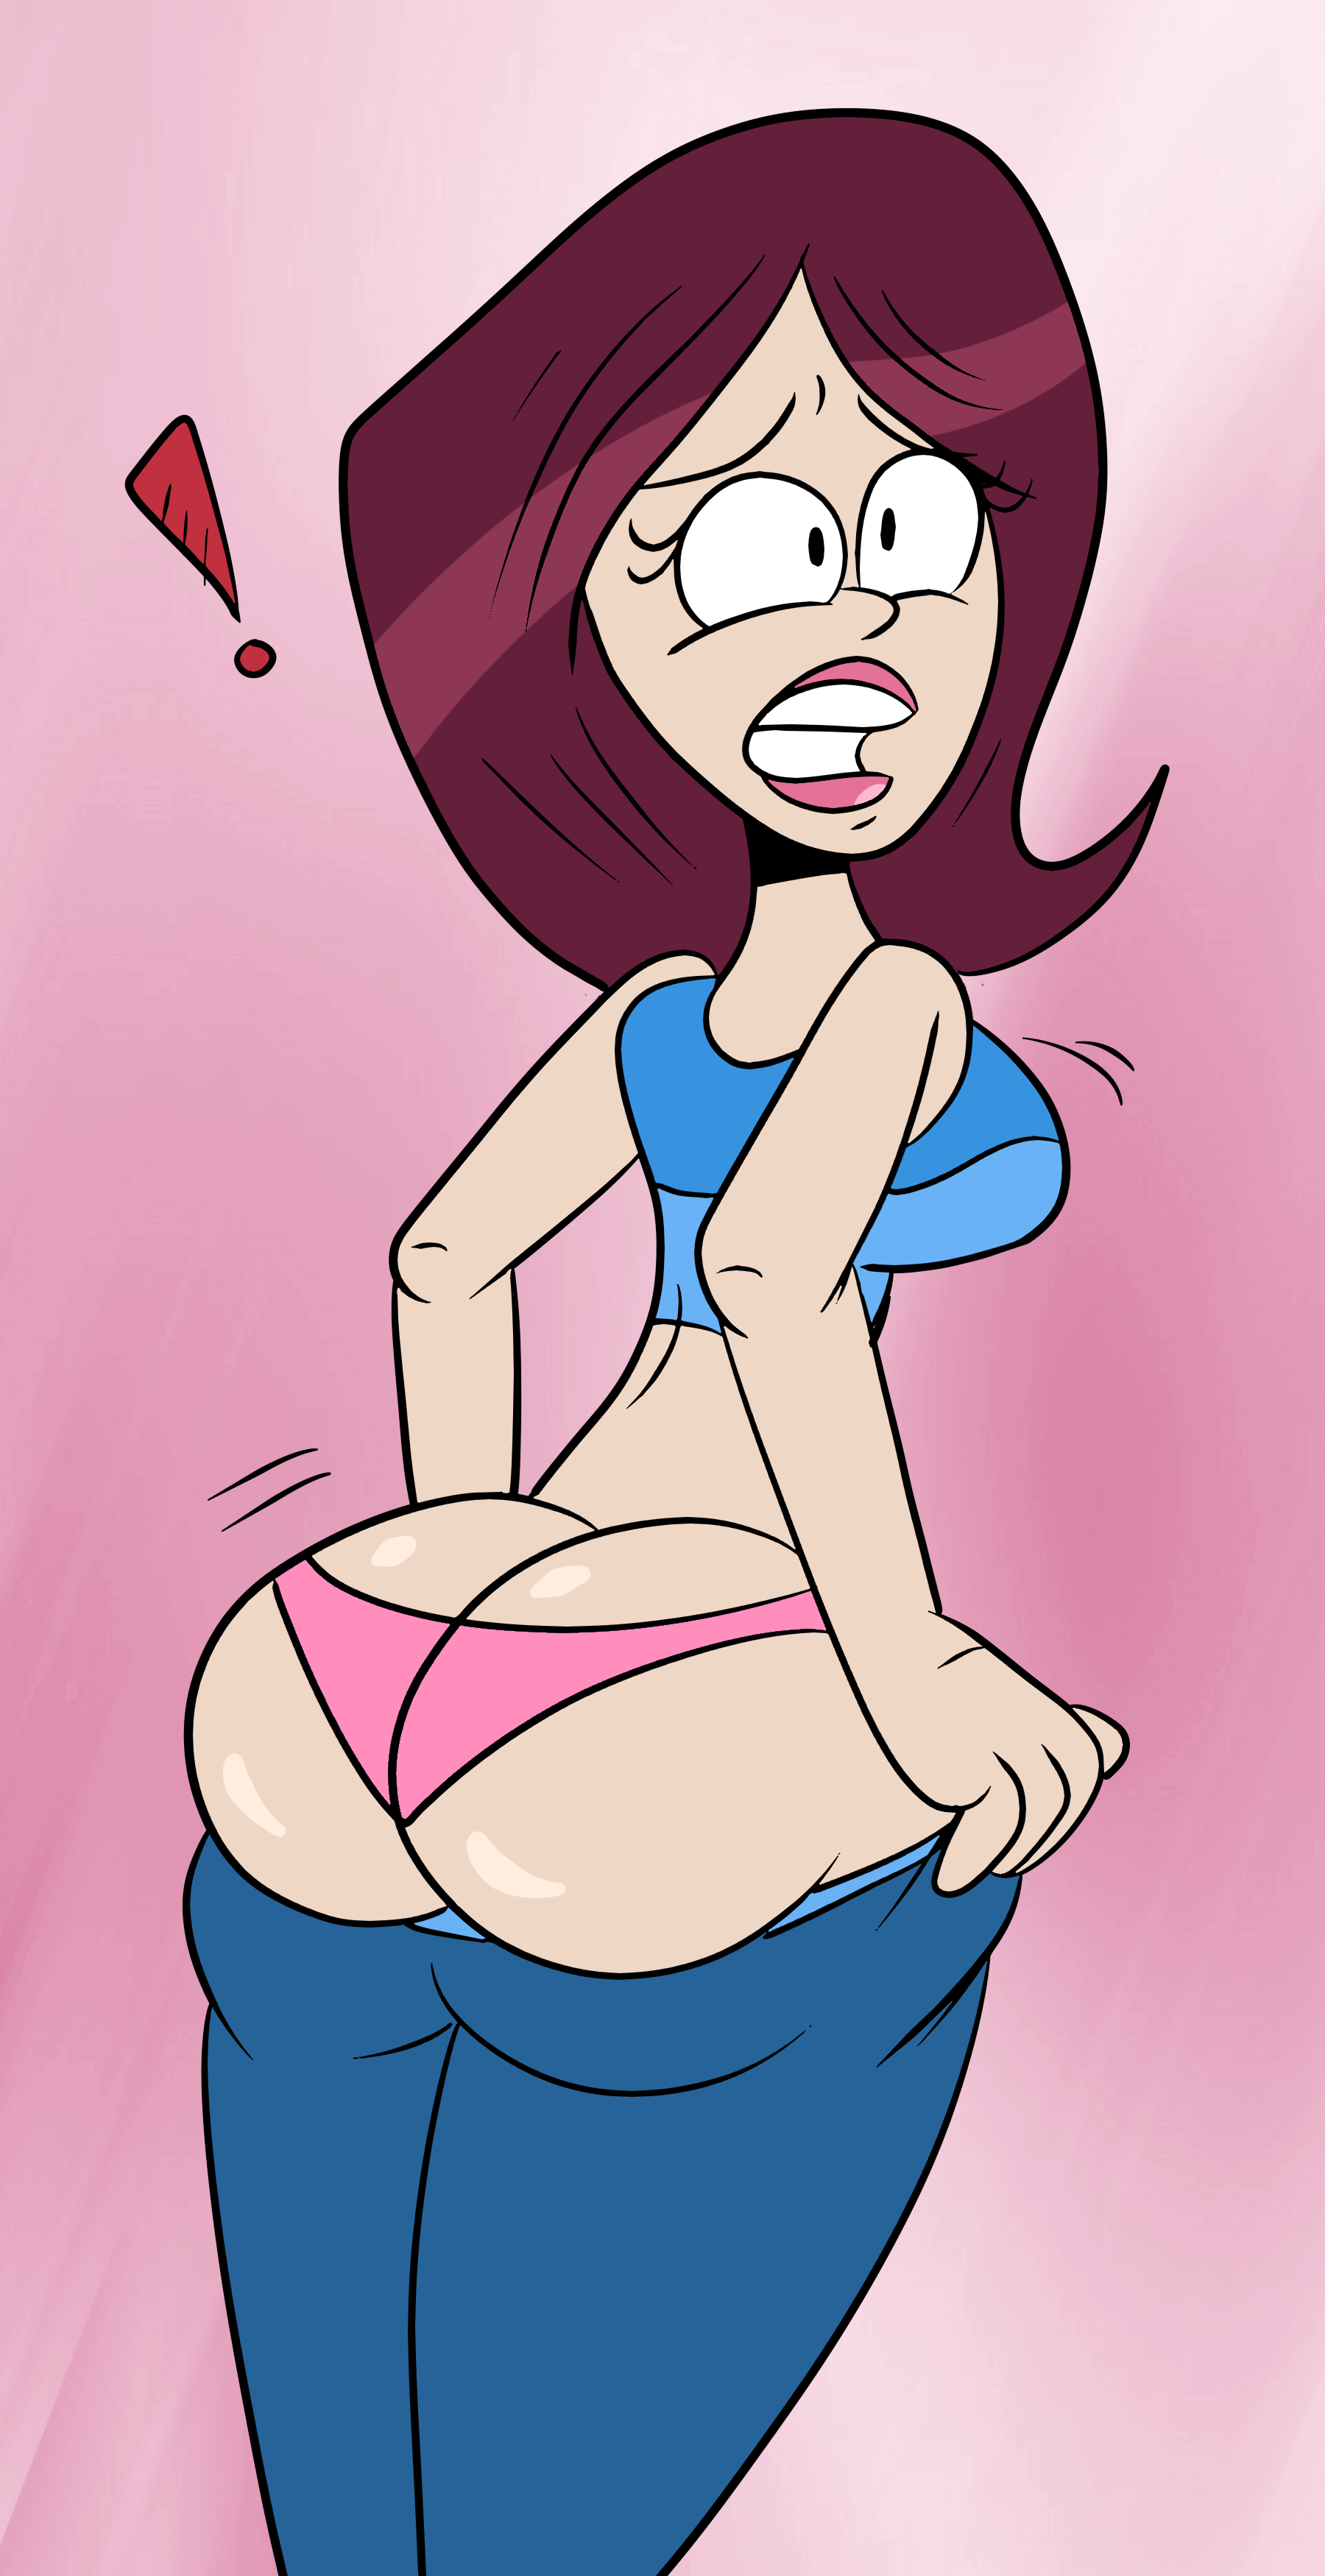 elise_vs_calories_by_scobionicle99_d98xby0.png